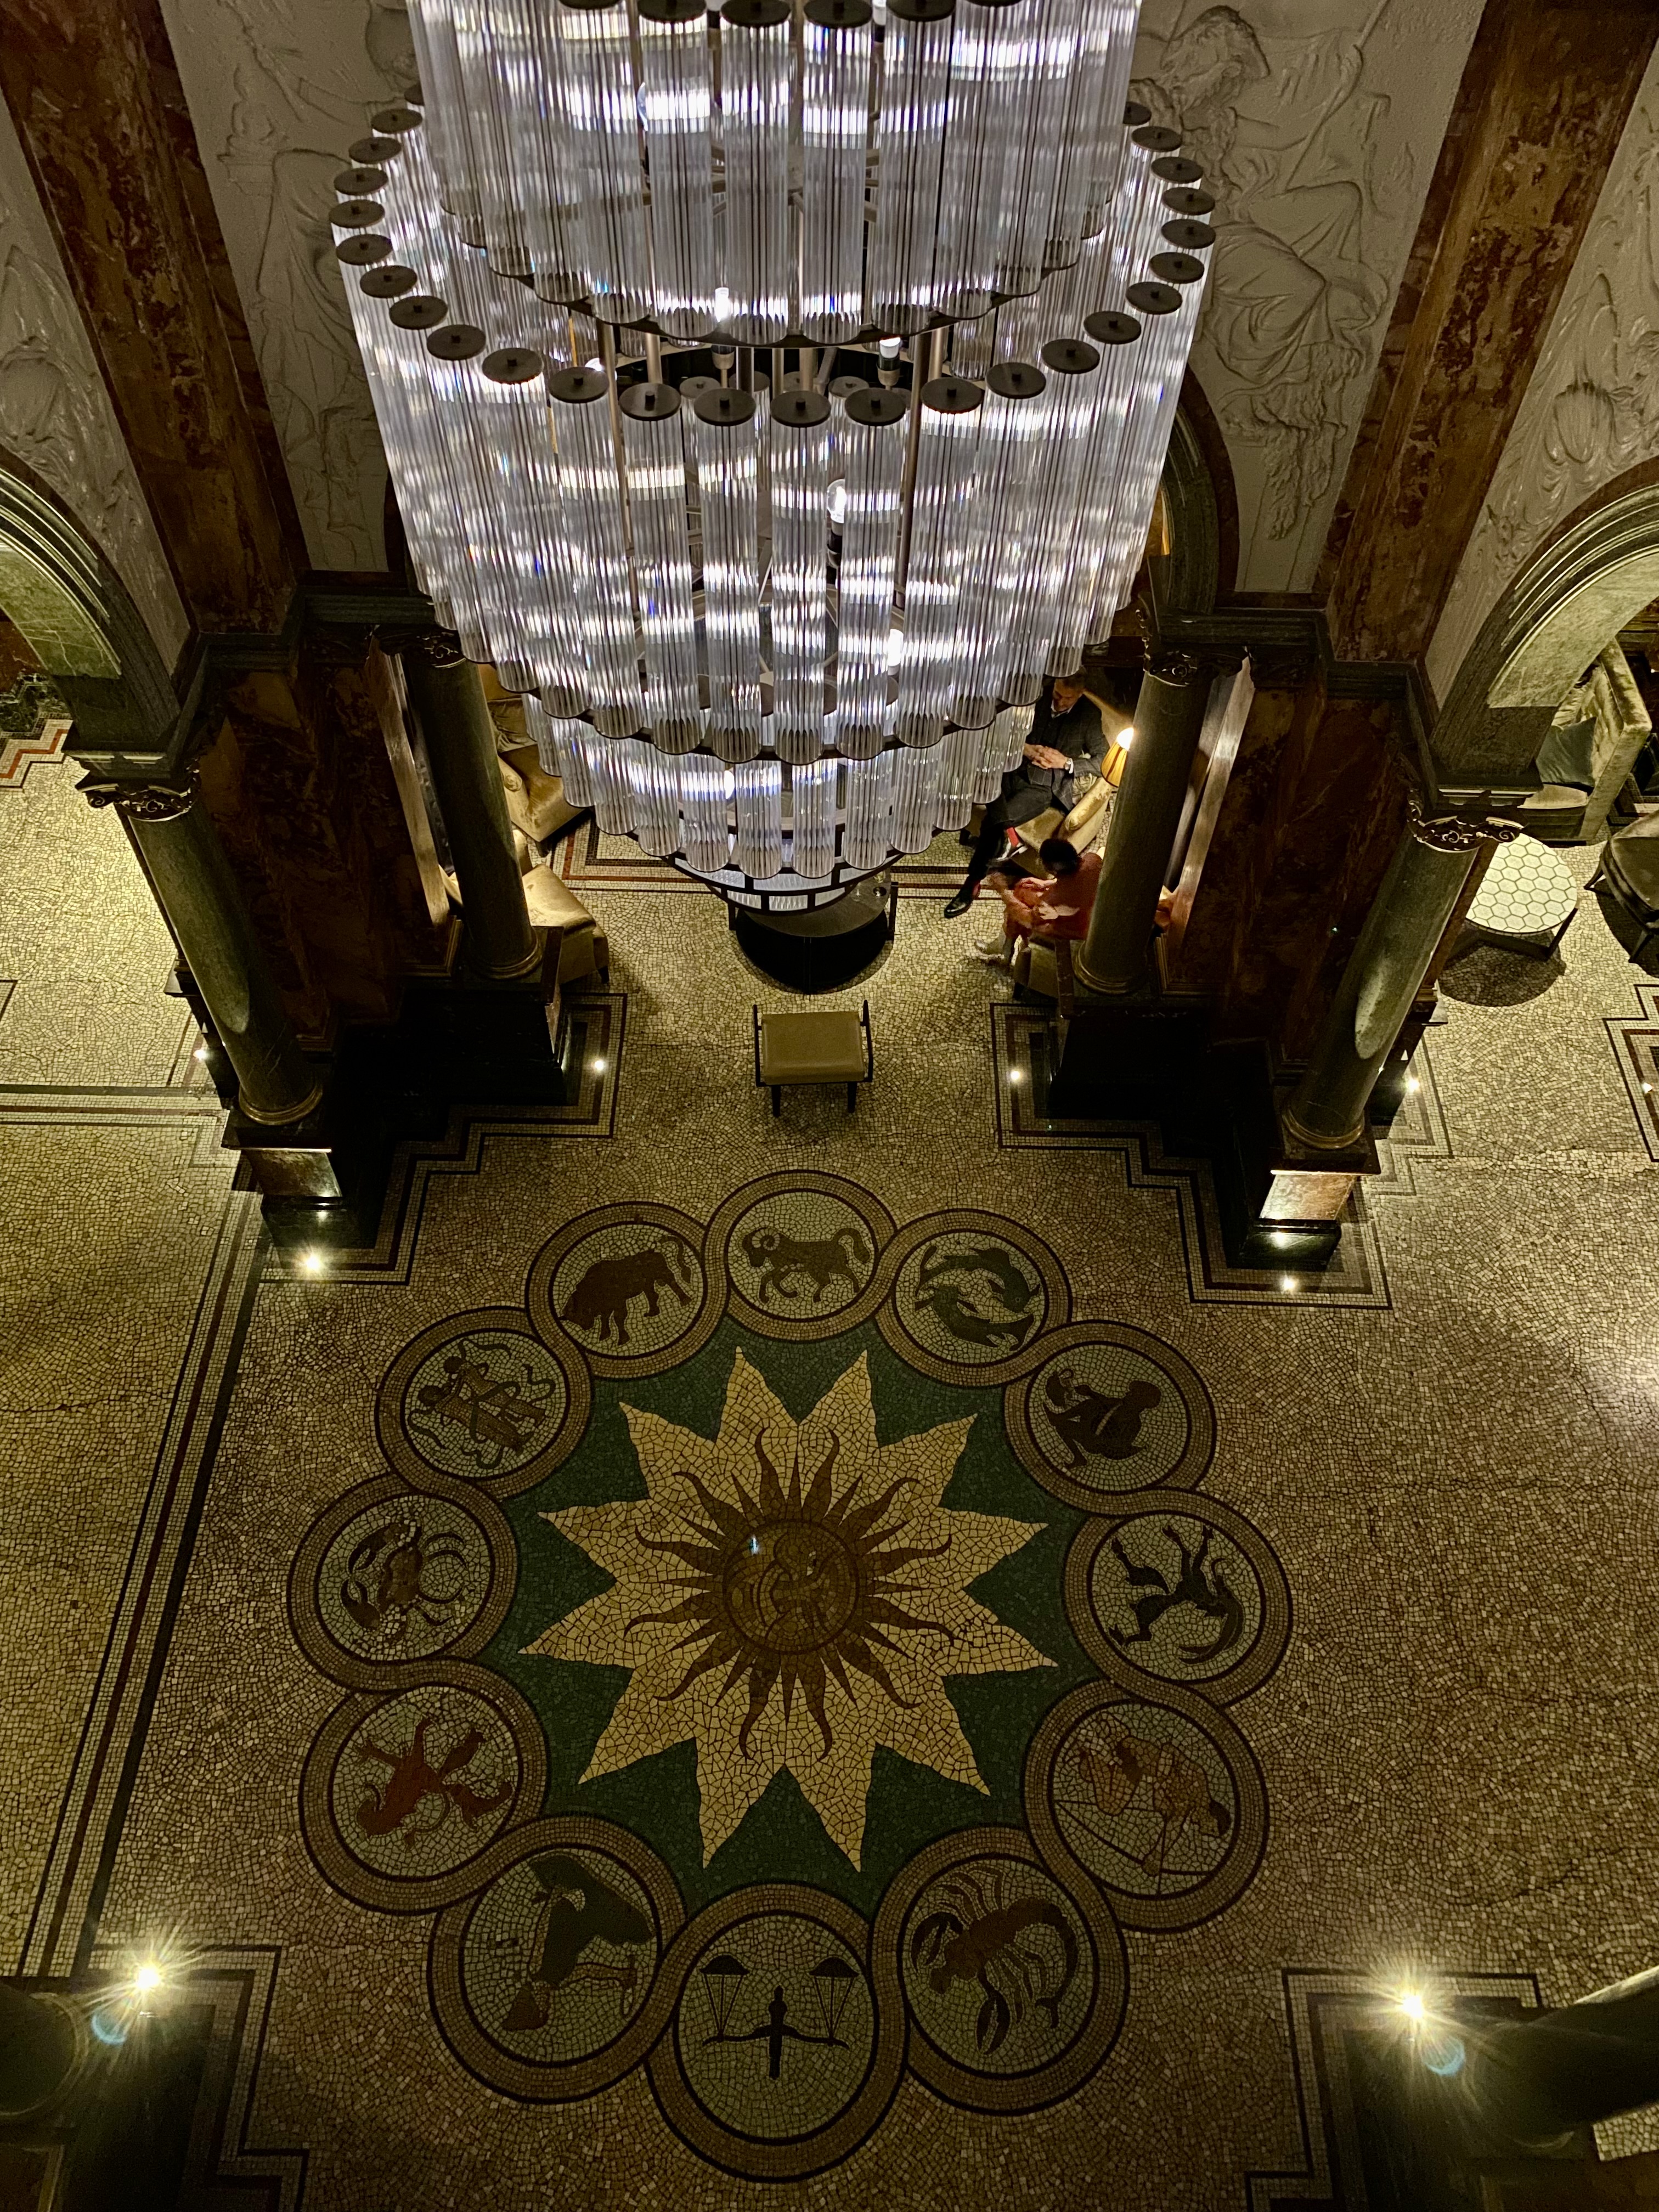 a chandelier in a room with a patterned floor